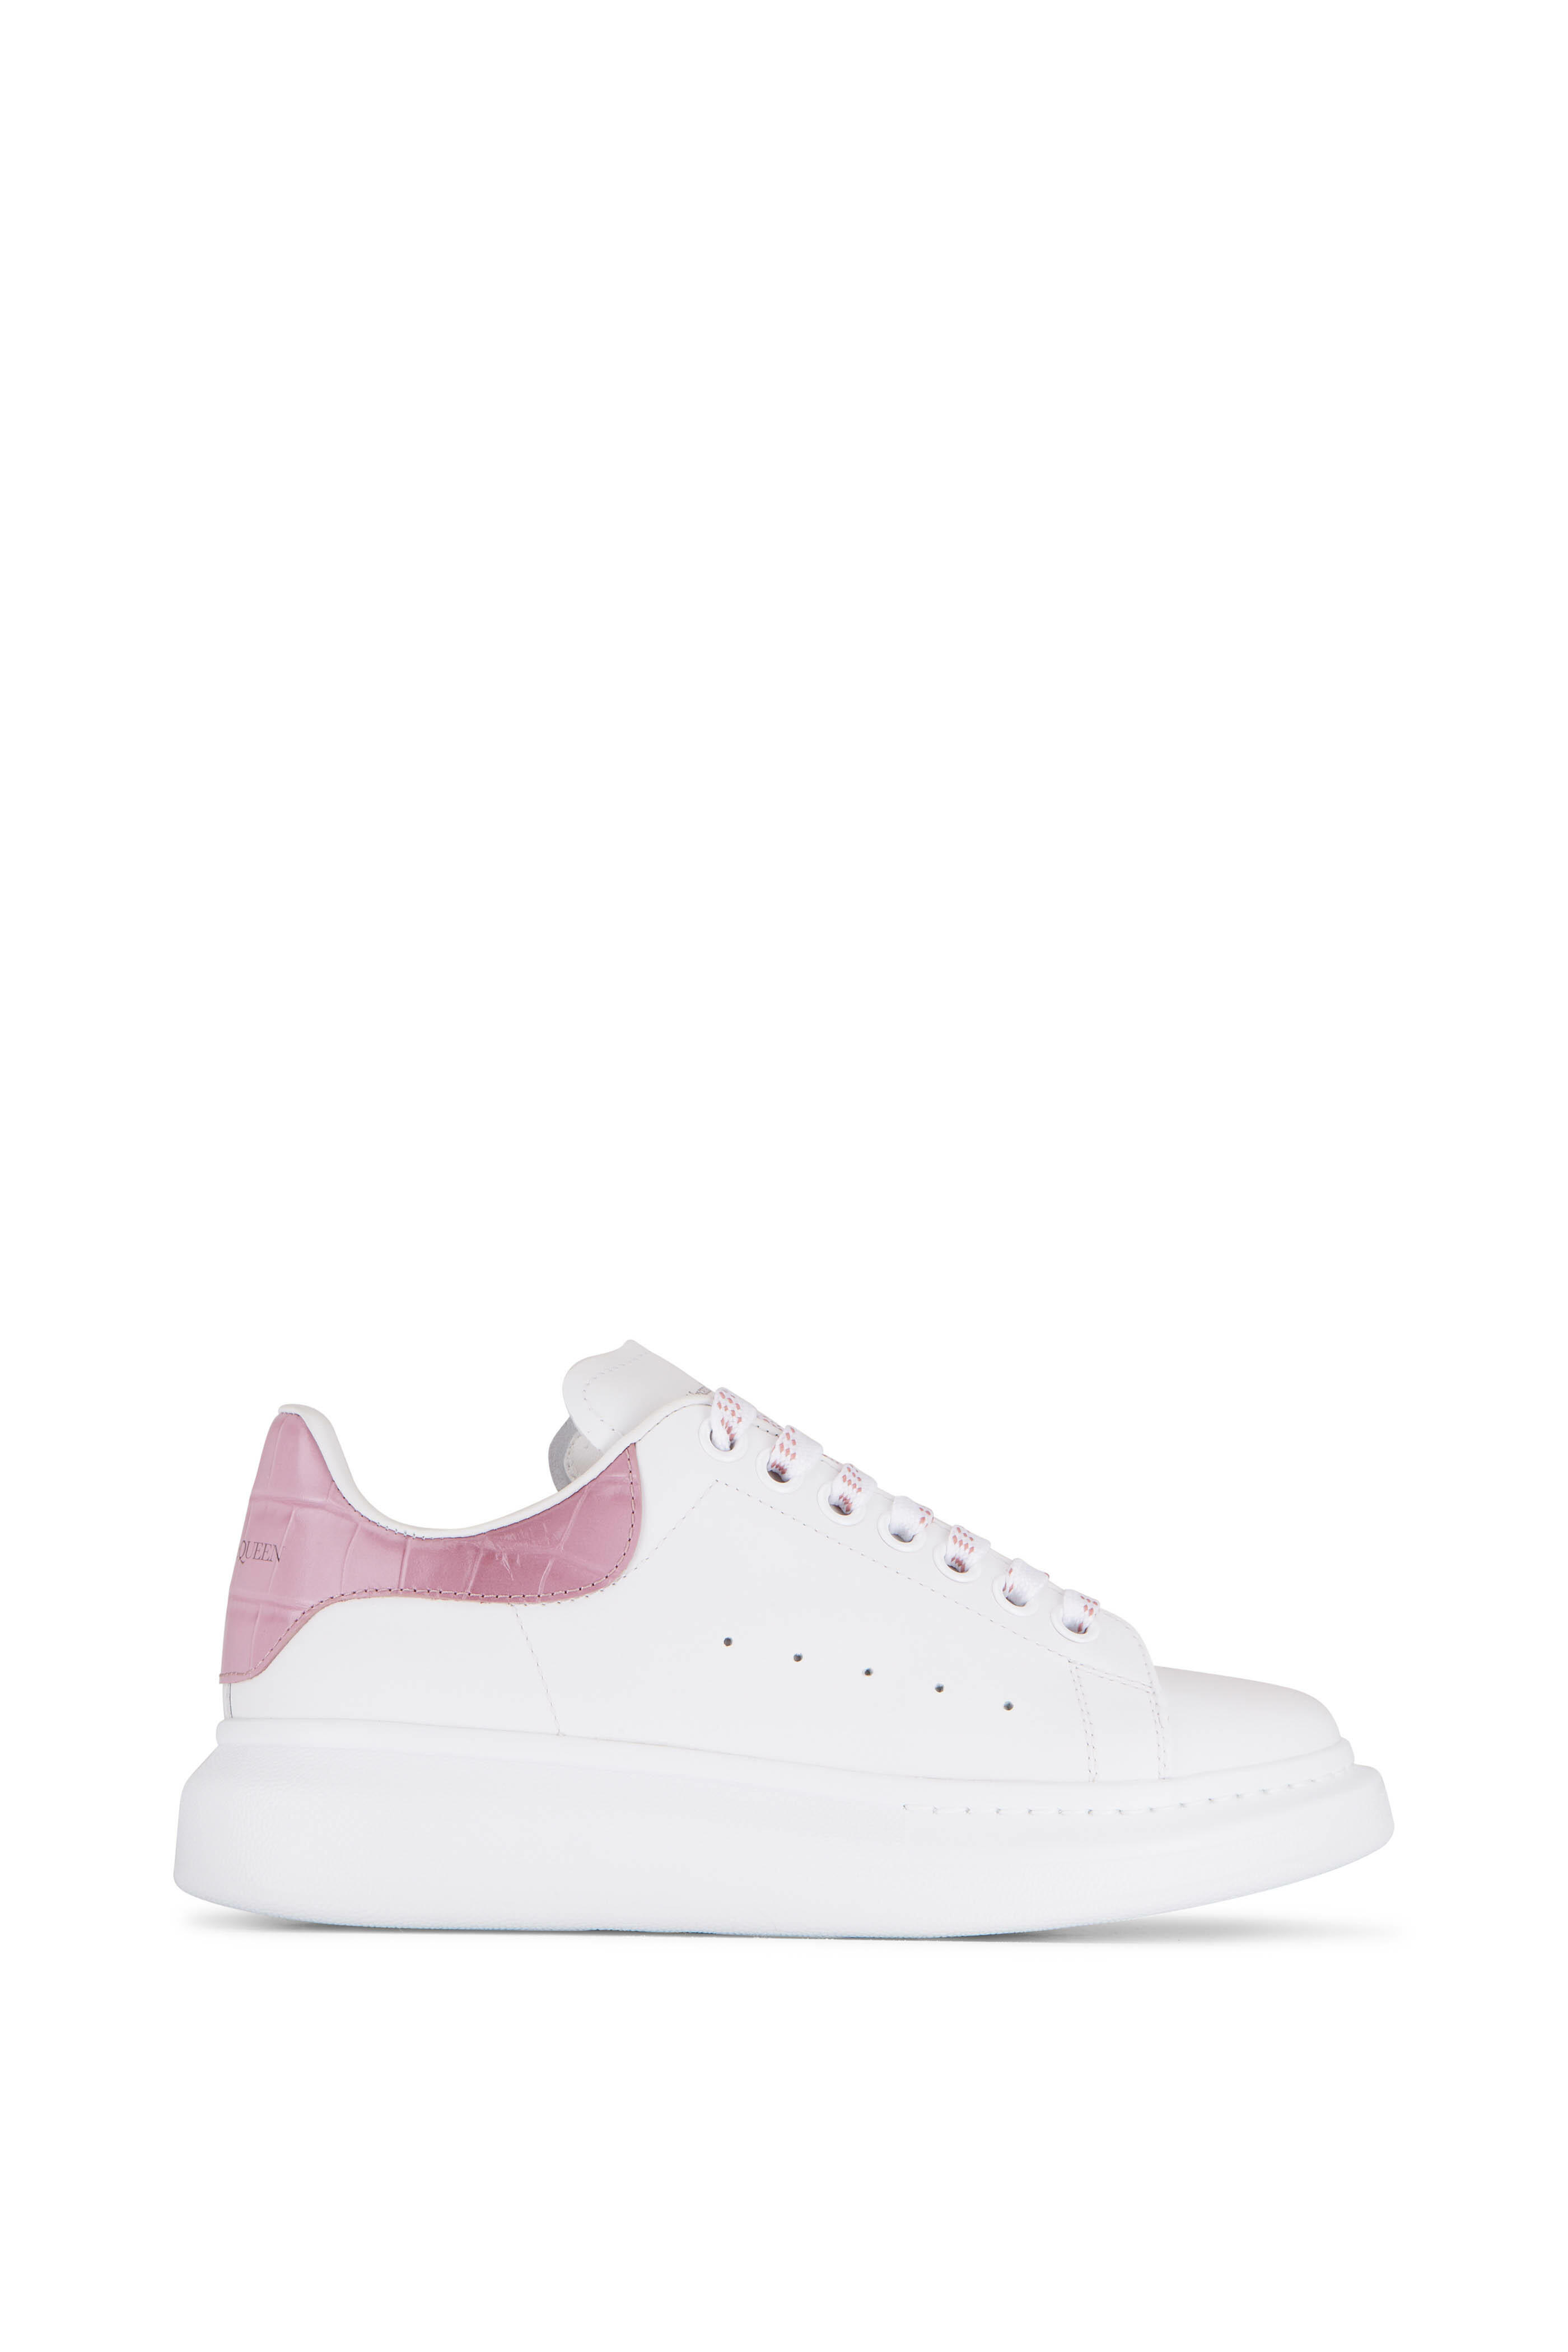 Alexander McQueen - White Leather & Pink Exaggerated Sole